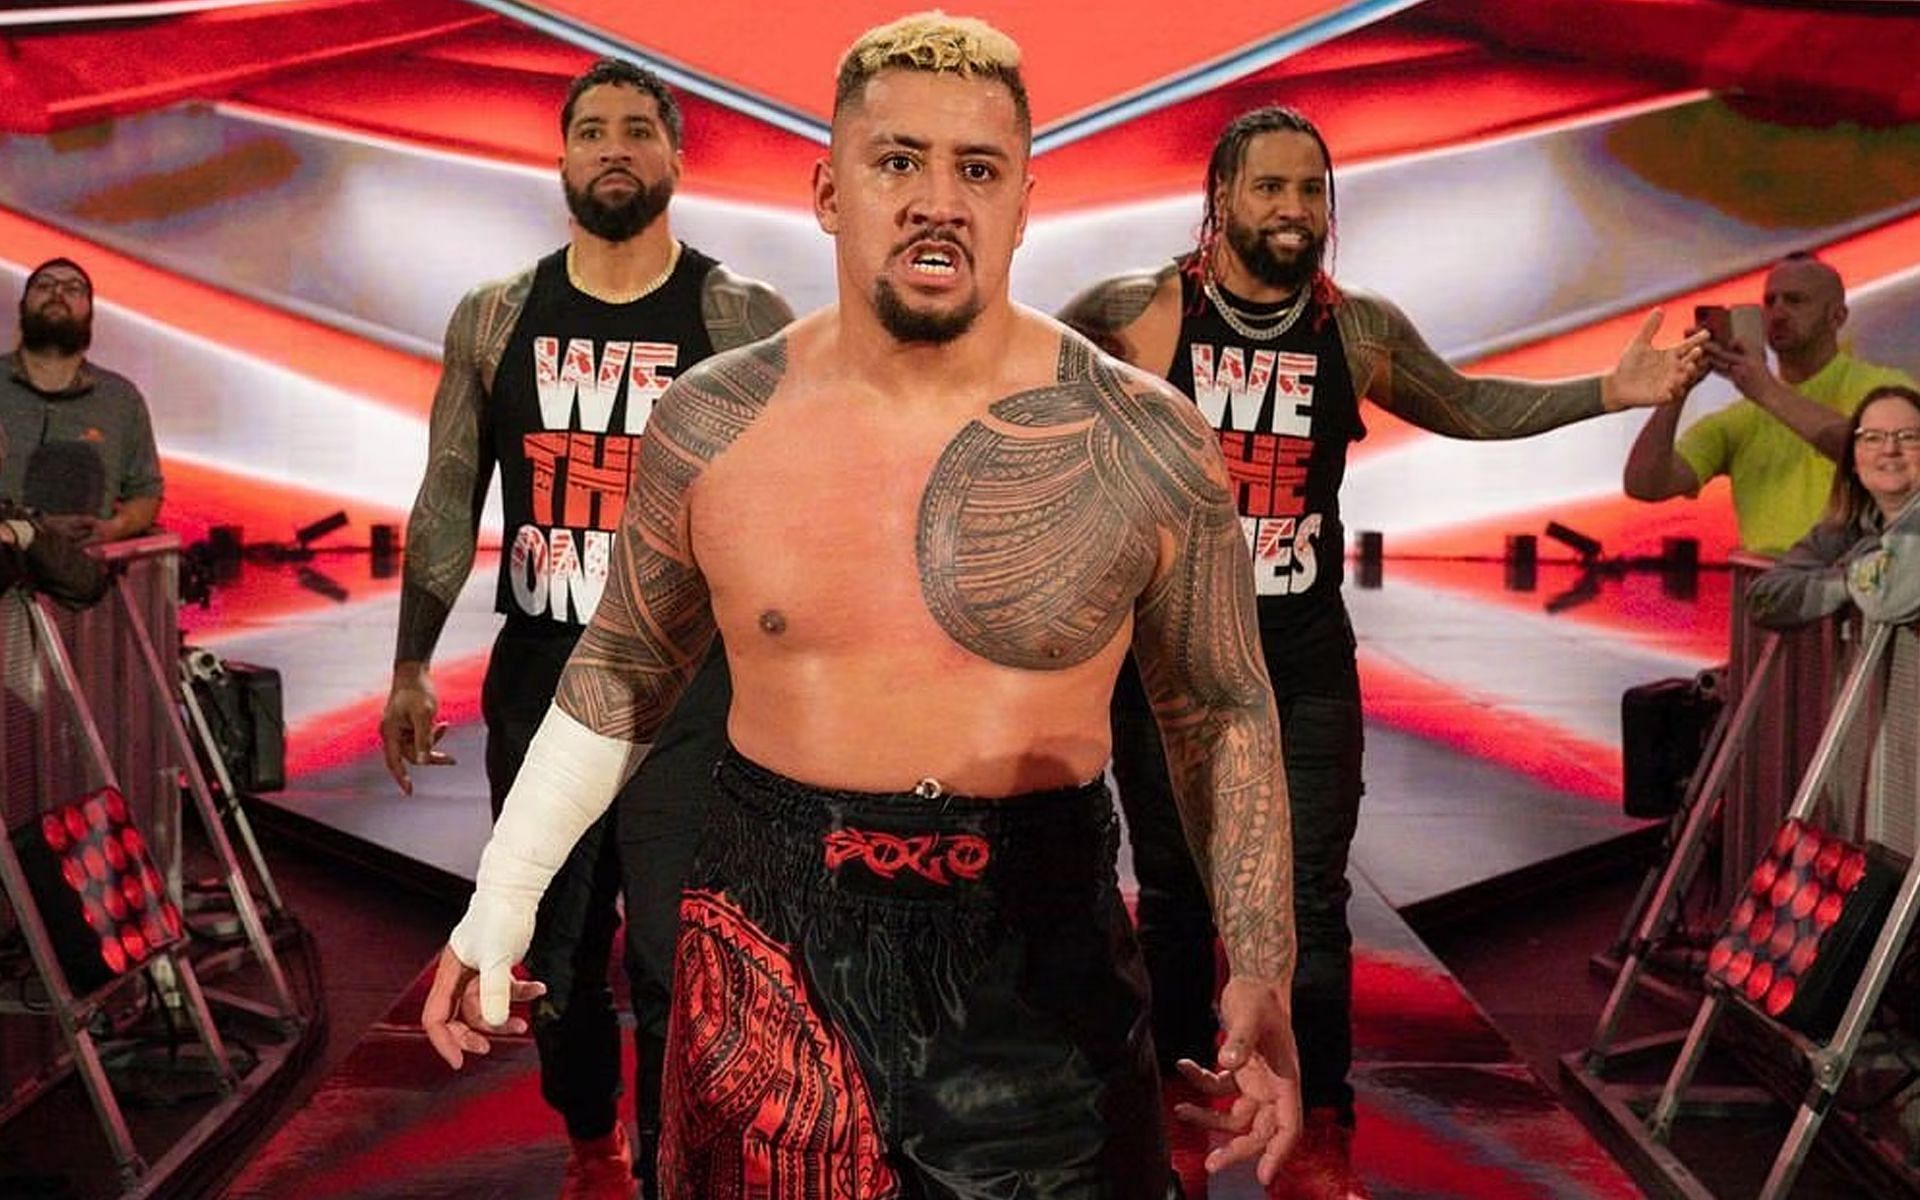 Solo Sikoa and The Usos are the real sons of Rikishi